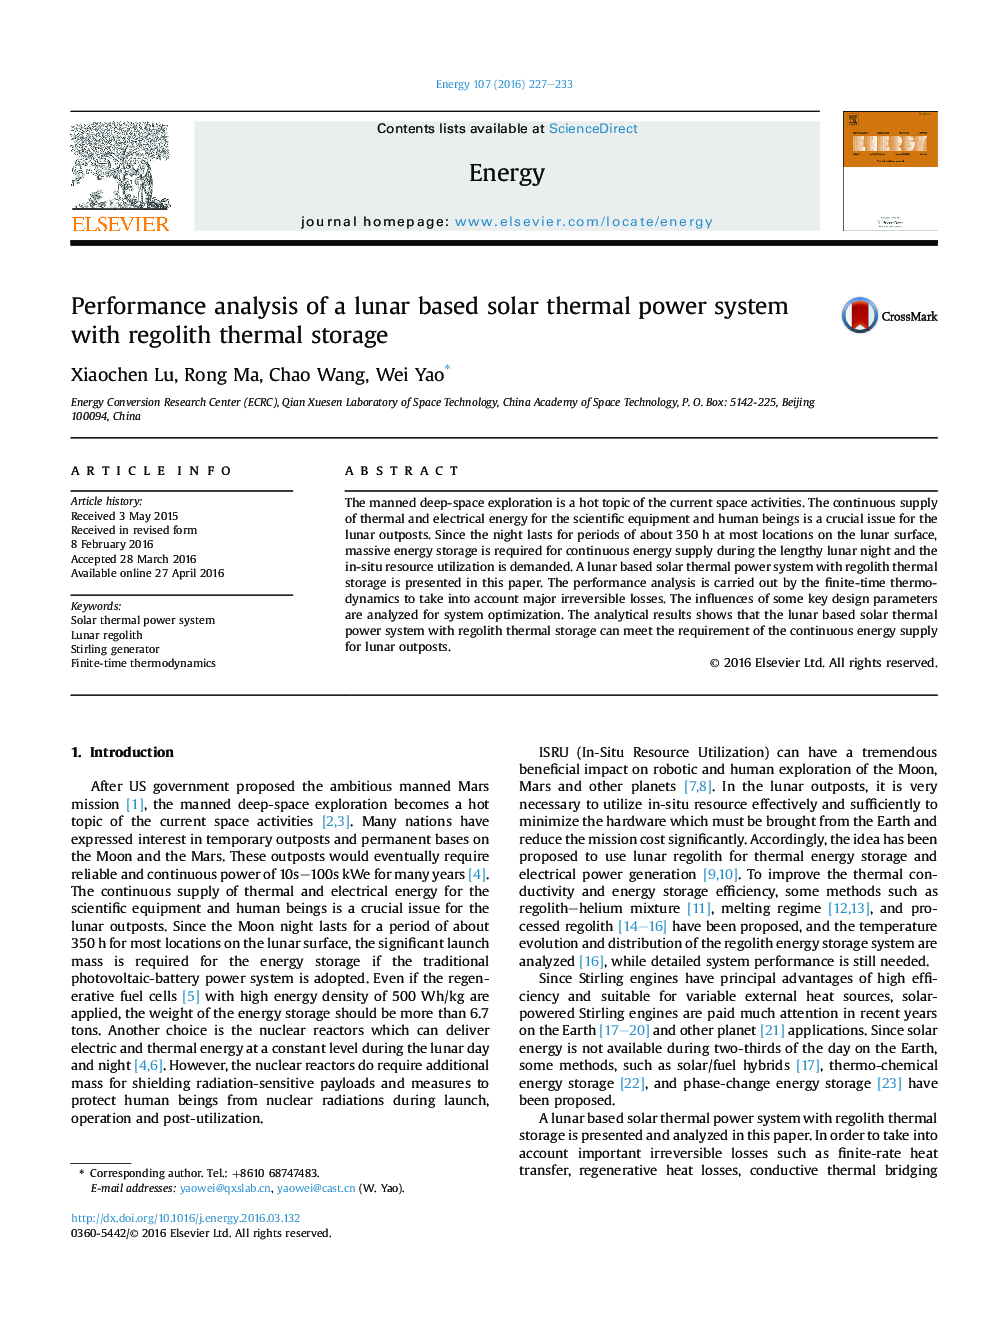 Performance analysis of a lunar based solar thermal power system with regolith thermal storage